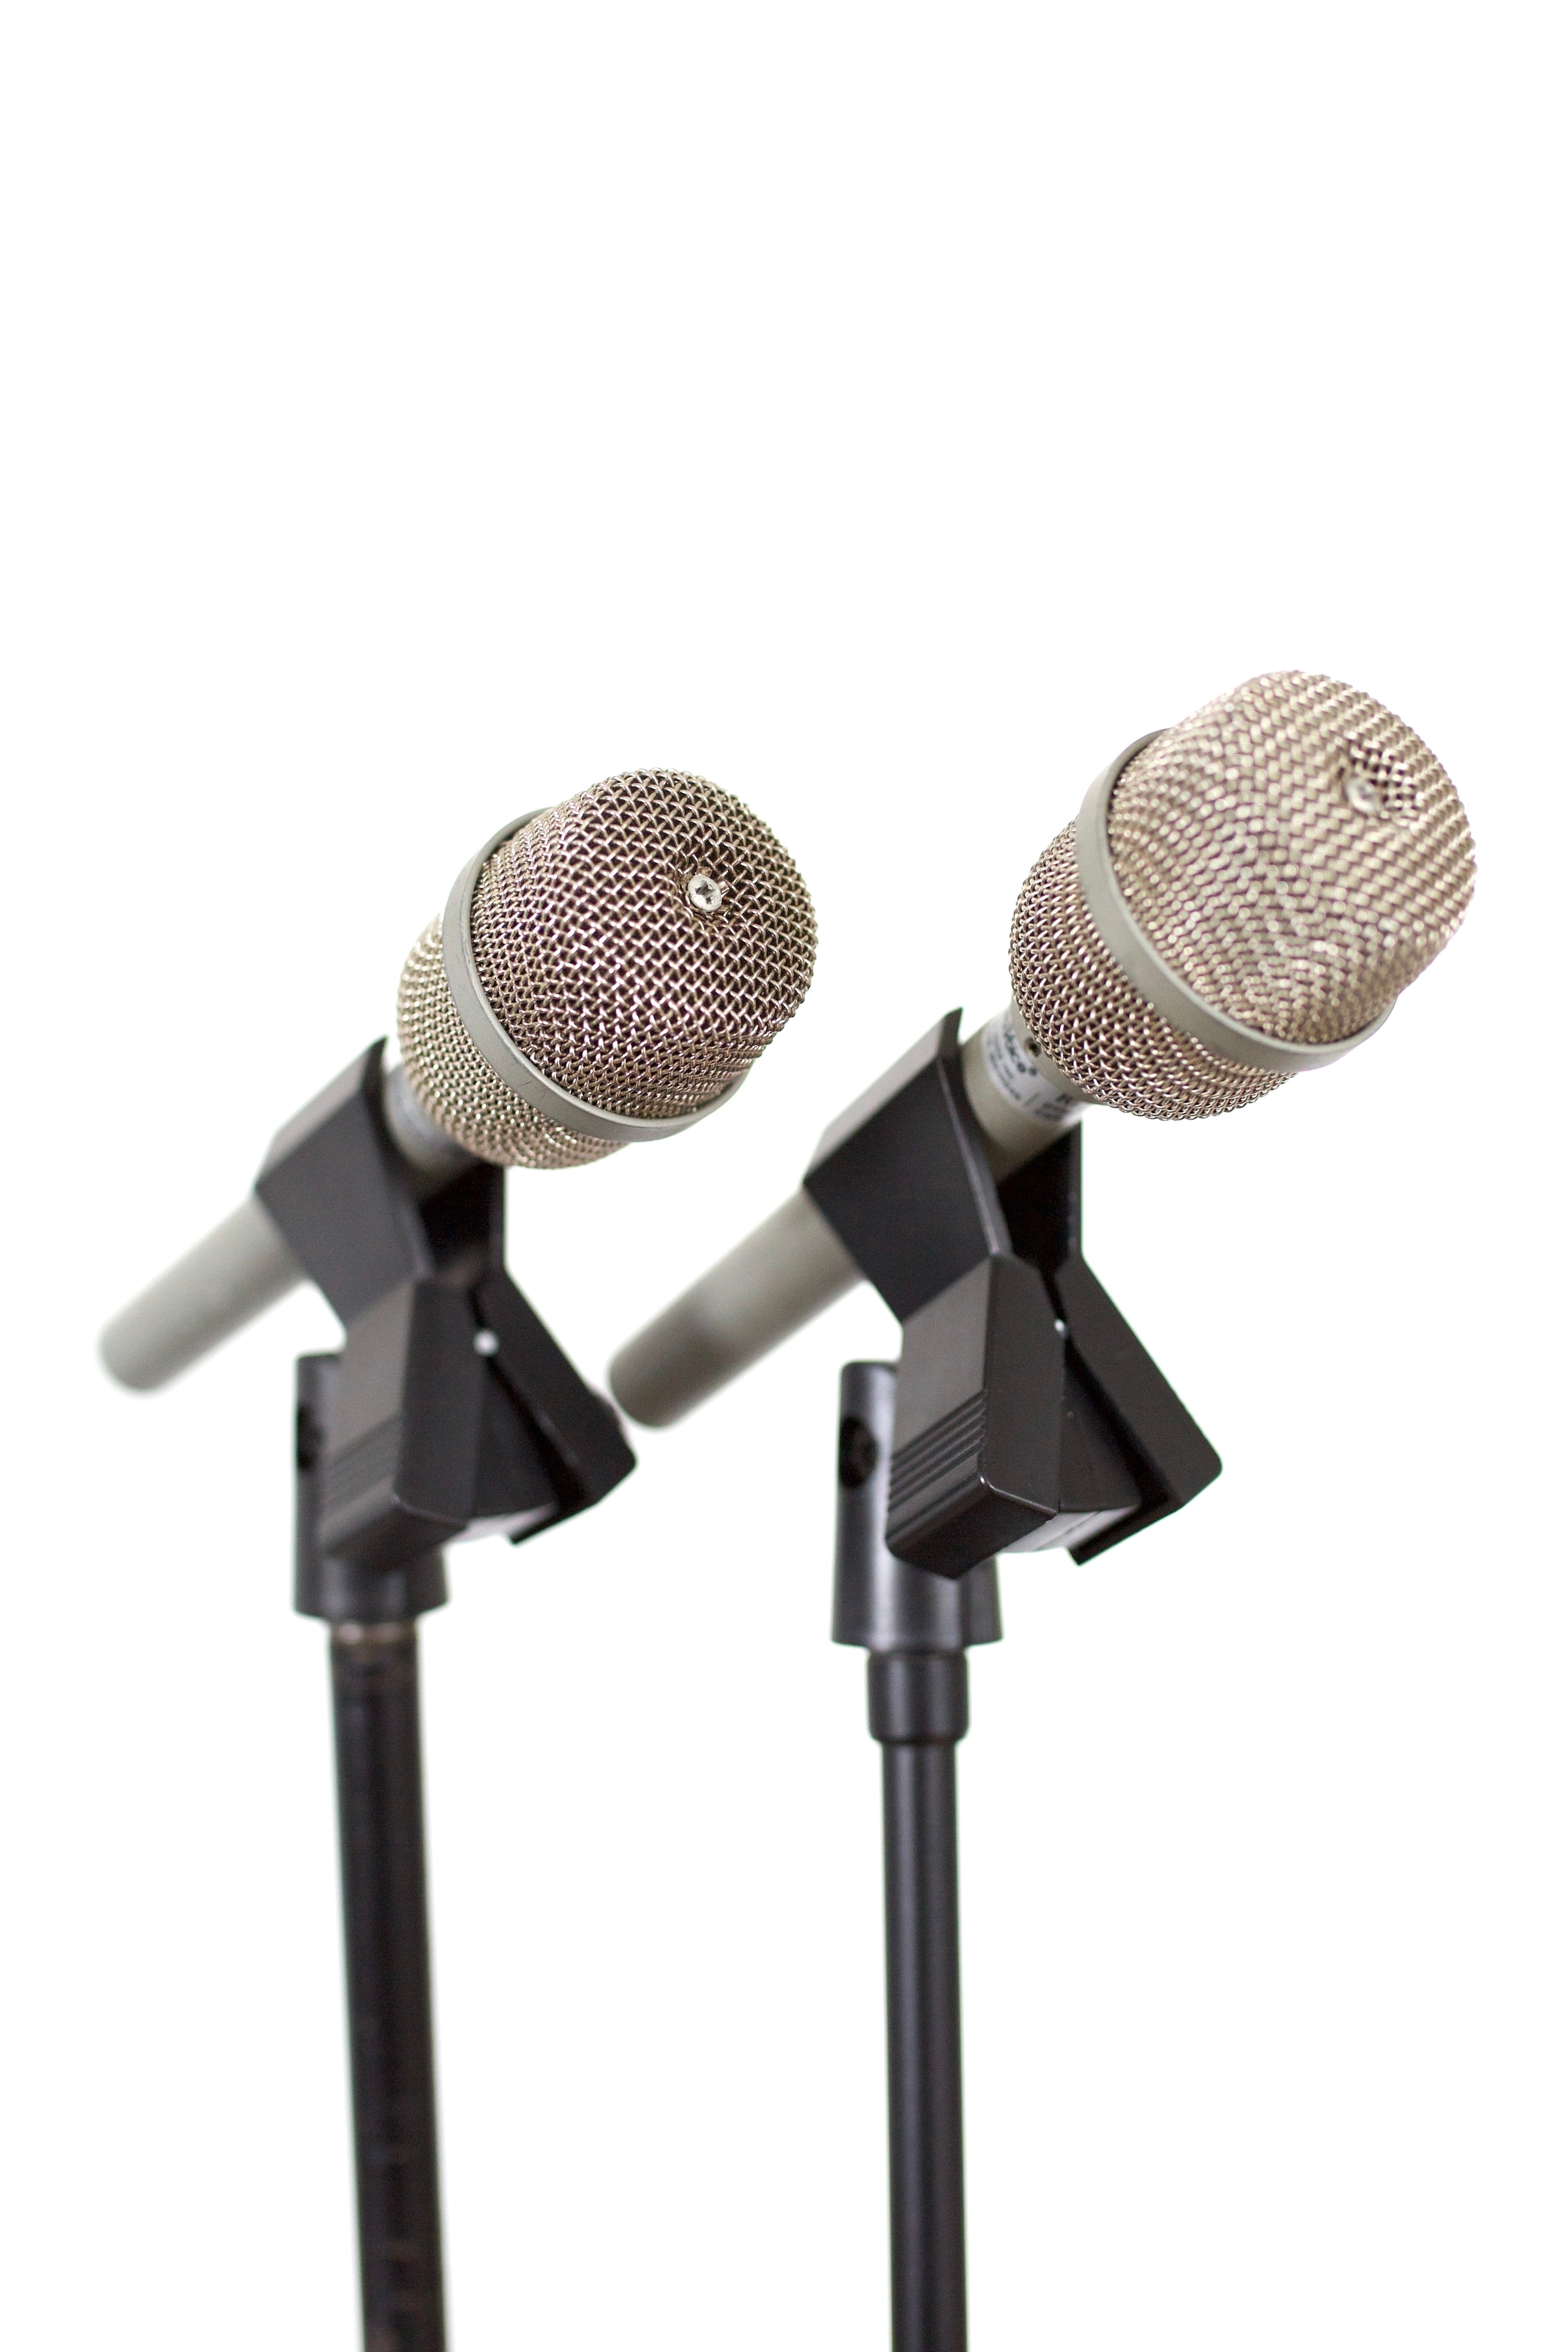 Electro Voice RE-11 Dynamic Microphone Pair